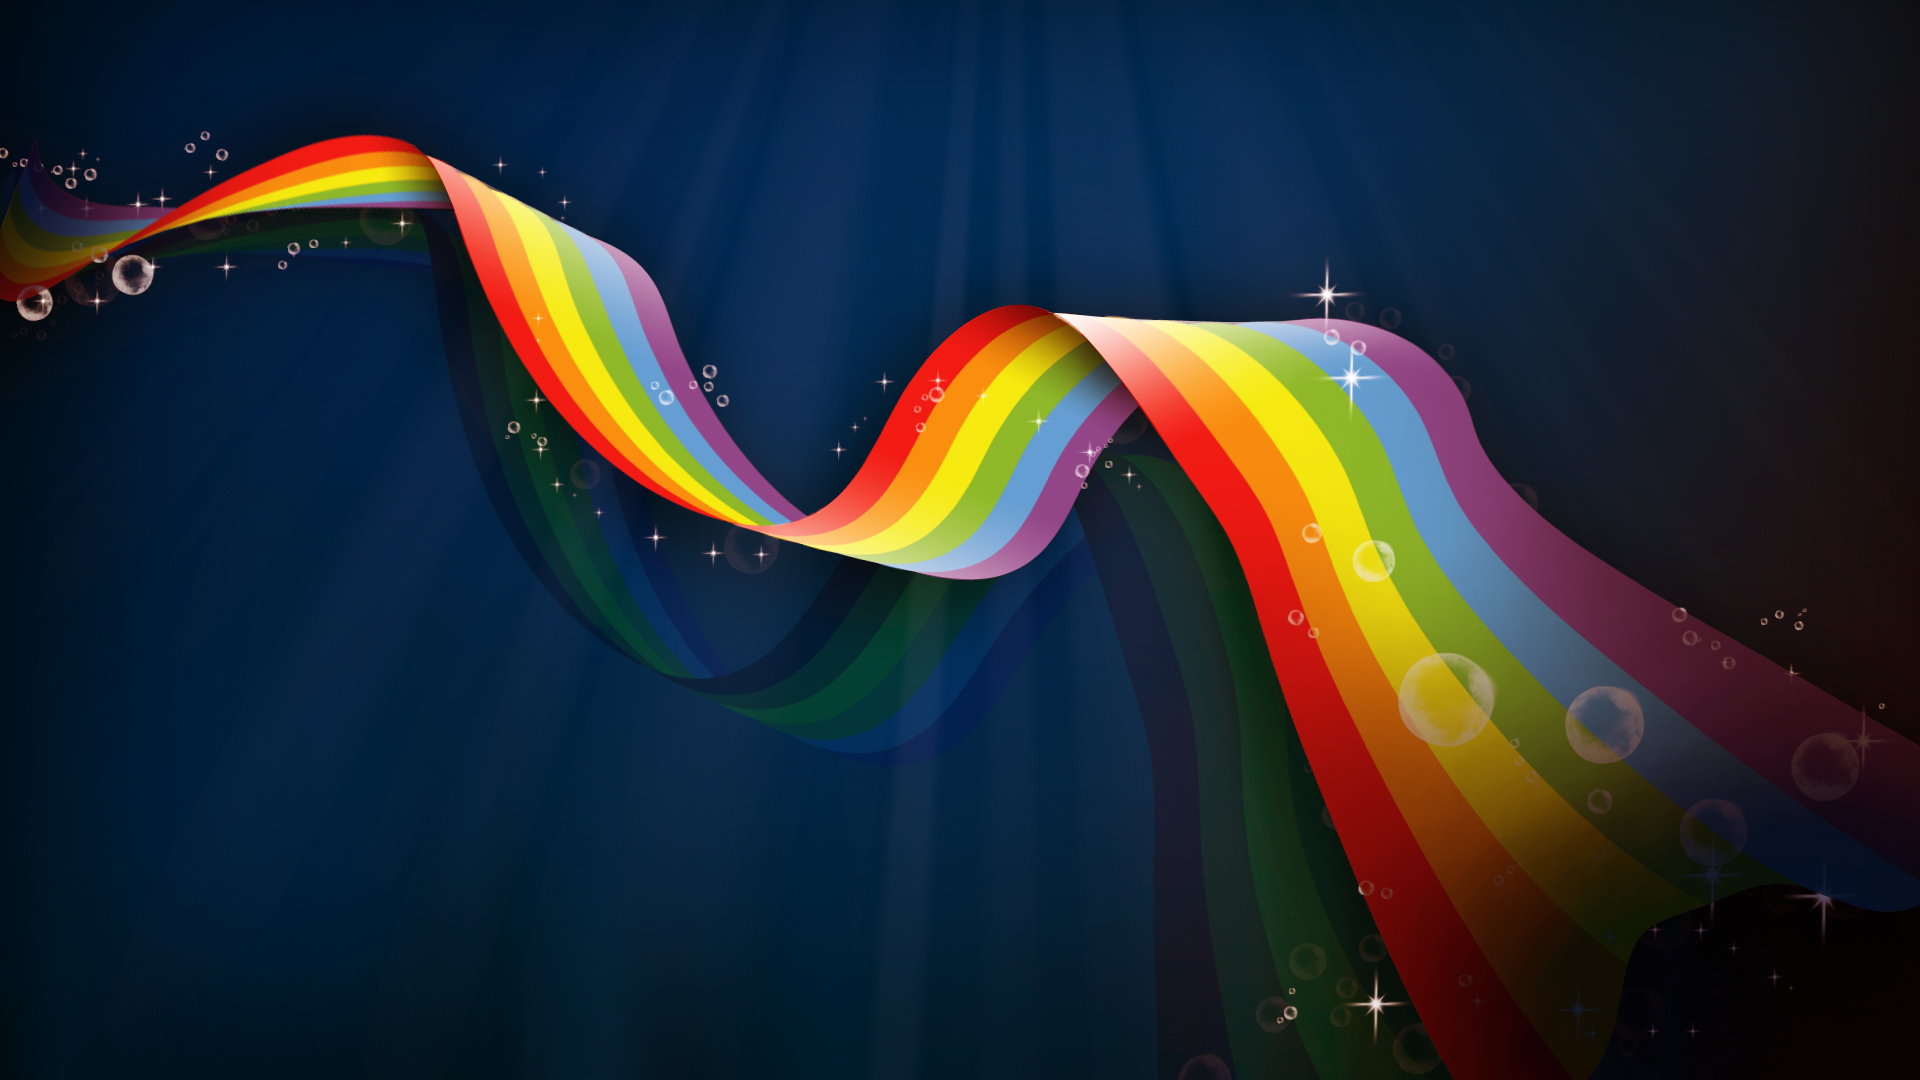 rainbows, Abstract, Colorful, Blue Wallpaper